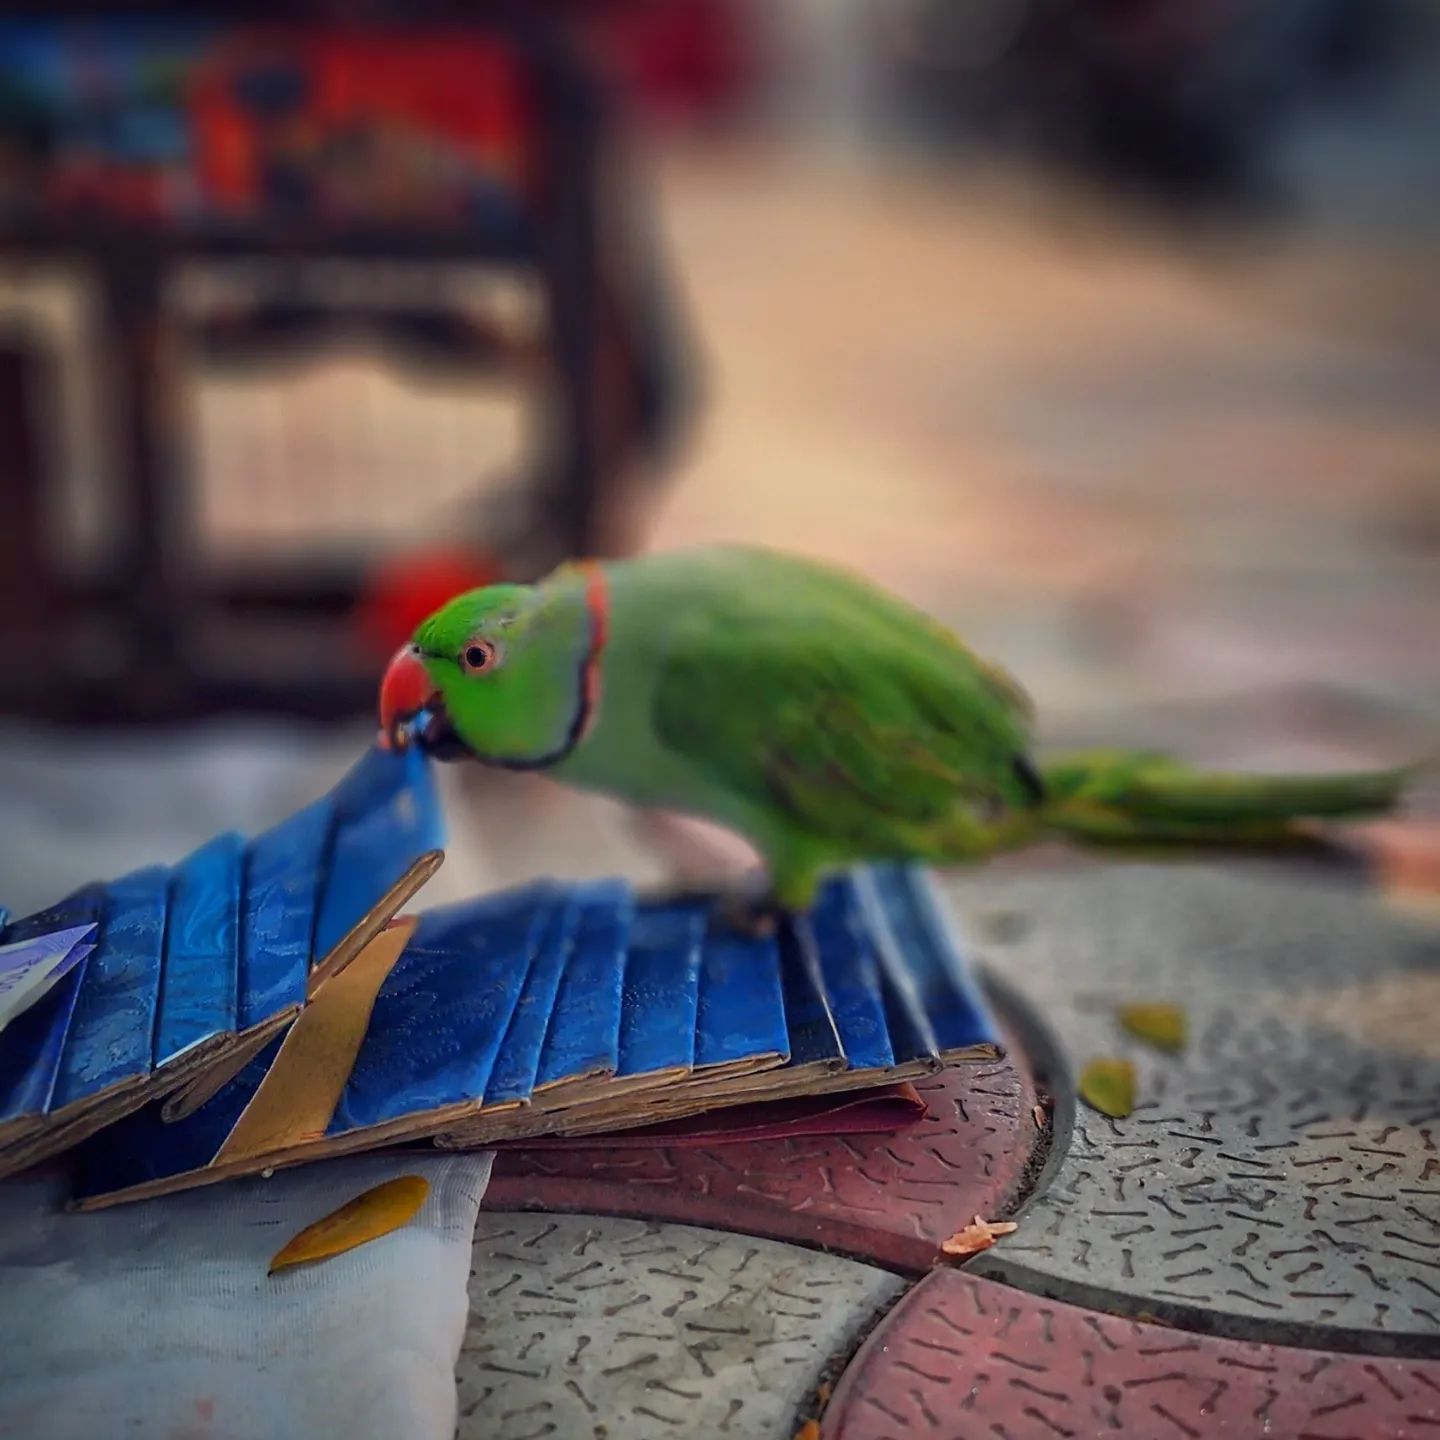 Parrot Picking up a card